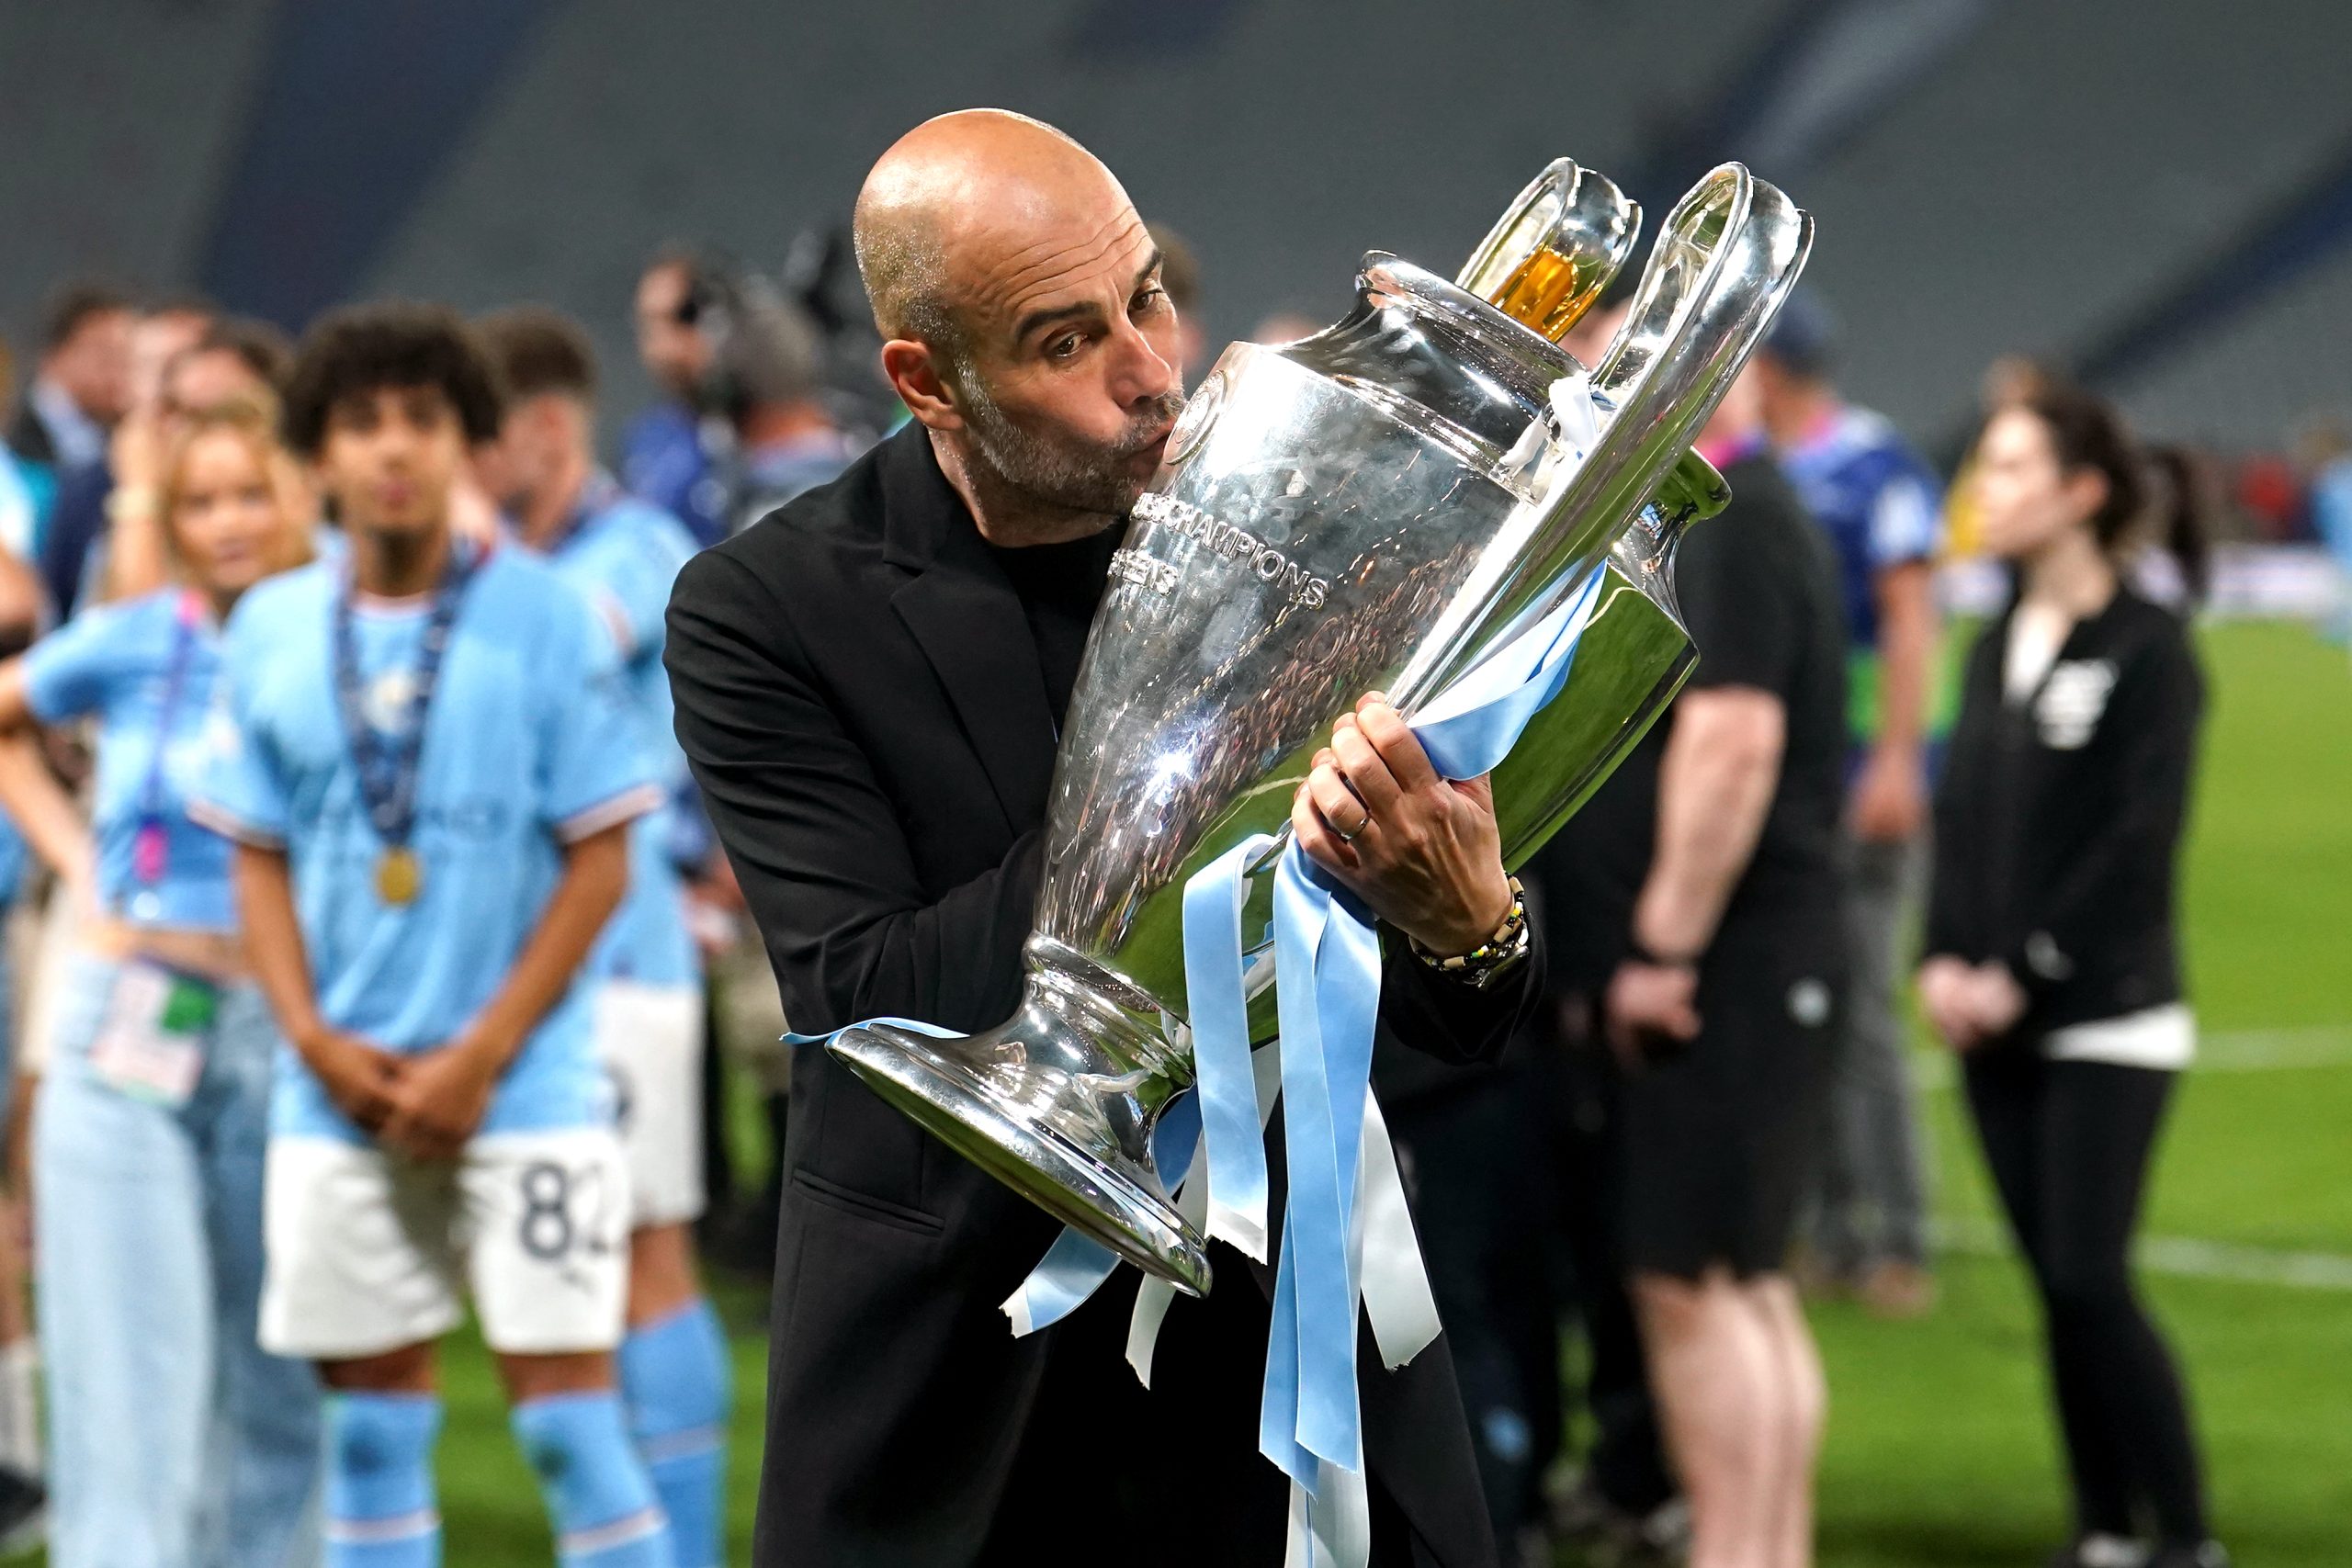 Pep Guardiola: Manchester City ‘part of history’ after winning Champions League